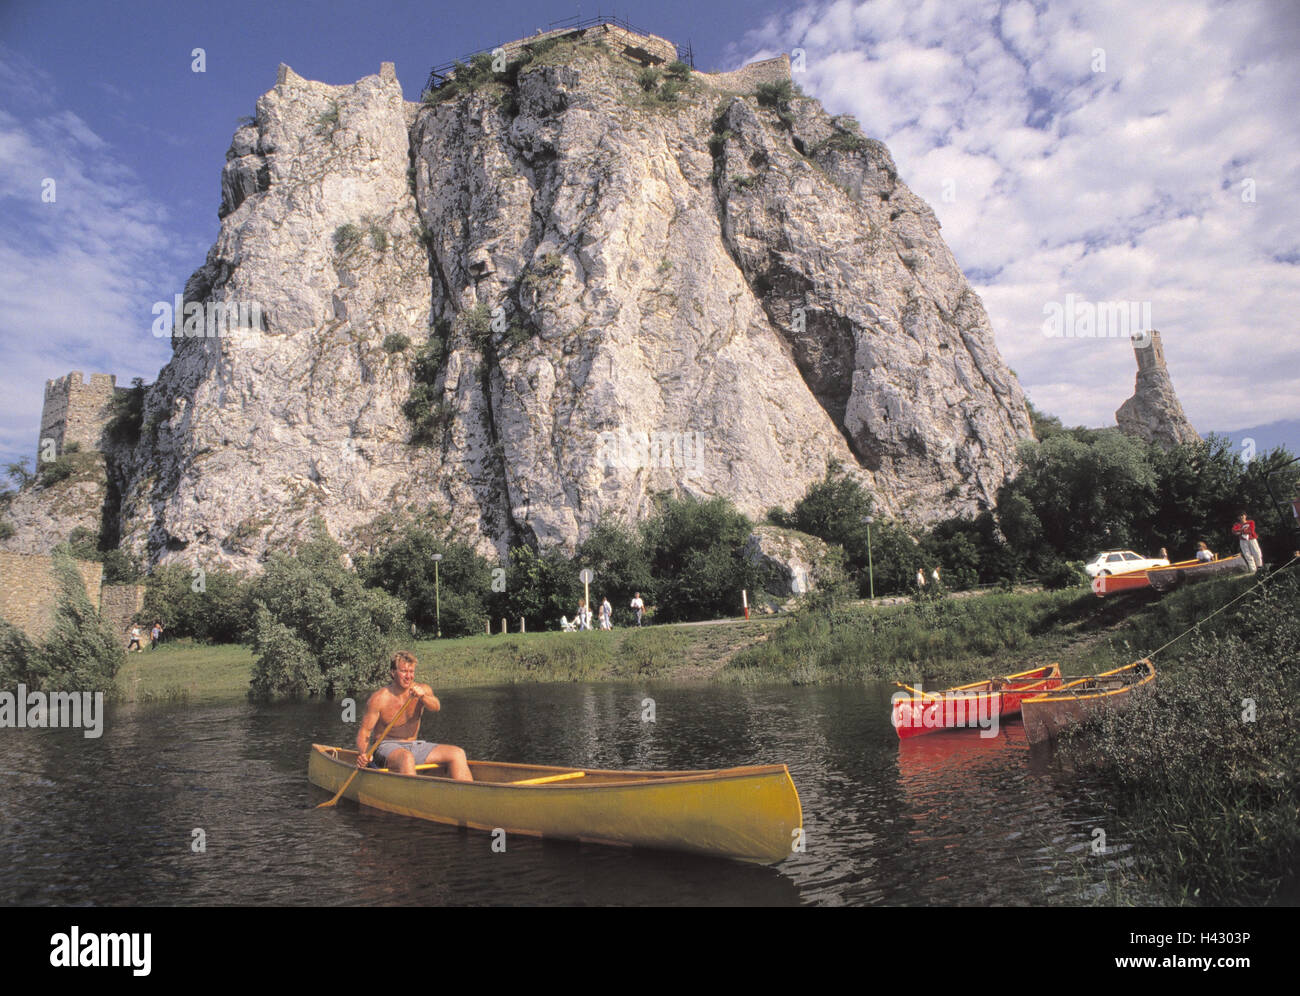 The Slovakian republic, Bratislava, the Danube, canoe driver, summer, Slovakia, Bratislava, scenery, river, waters, canoe driving, leisure time, hobby, vacation, activity, bile, mountain, ruin Thebes 'Hrad Devin', national shrine, culture, place of intere Stock Photo